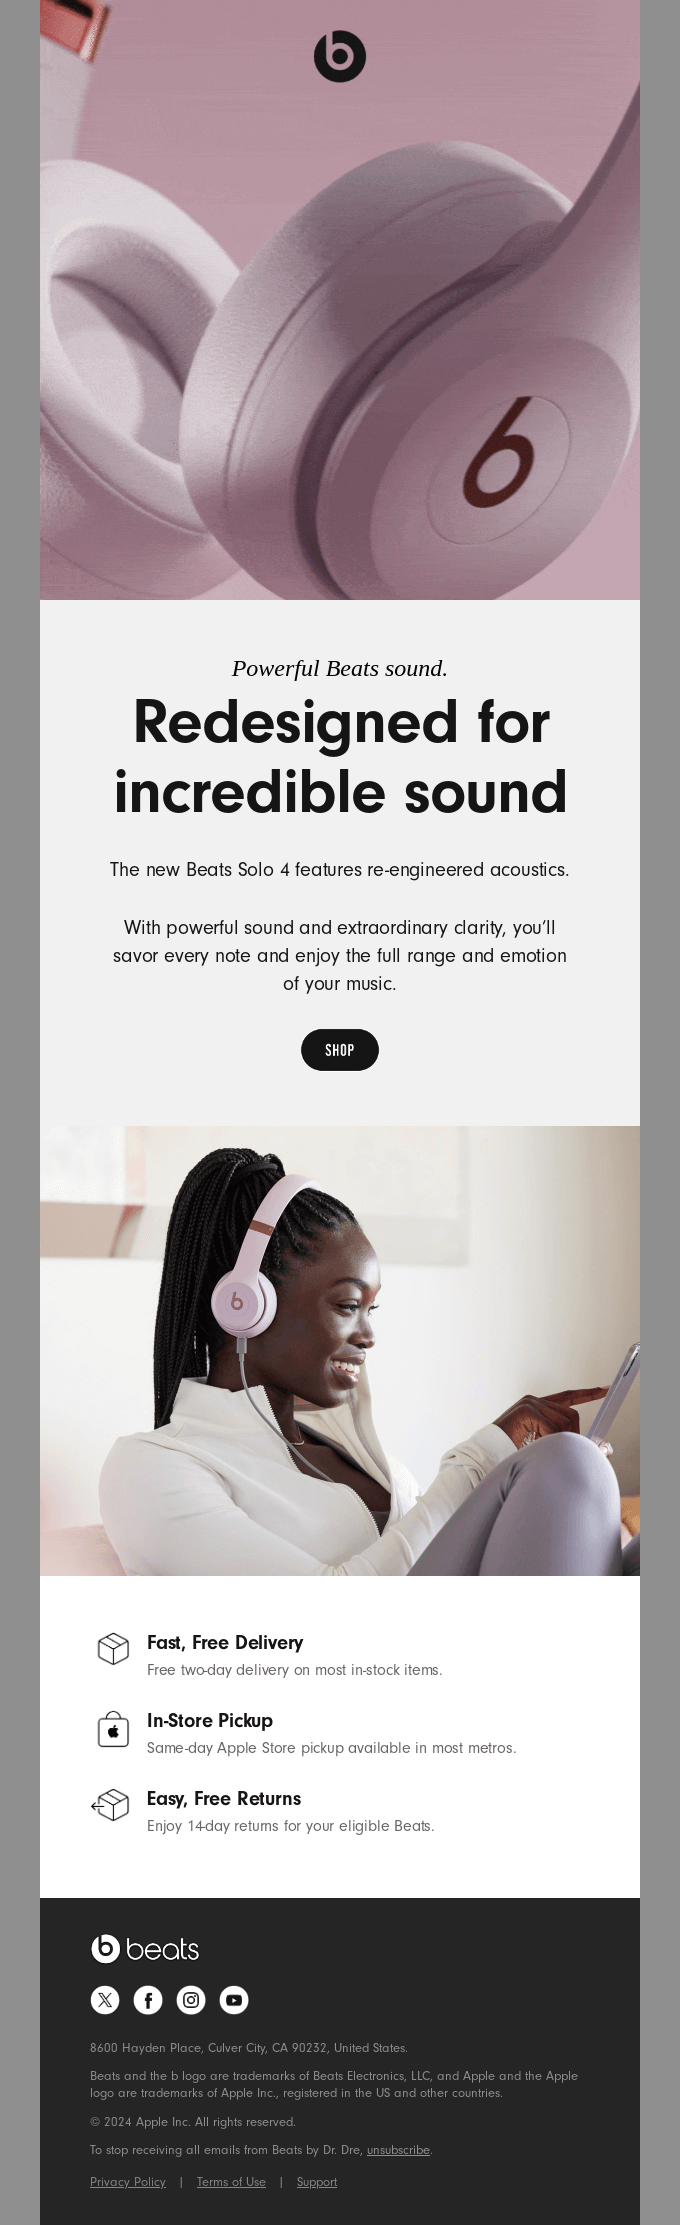 Redesigned for incredible sound